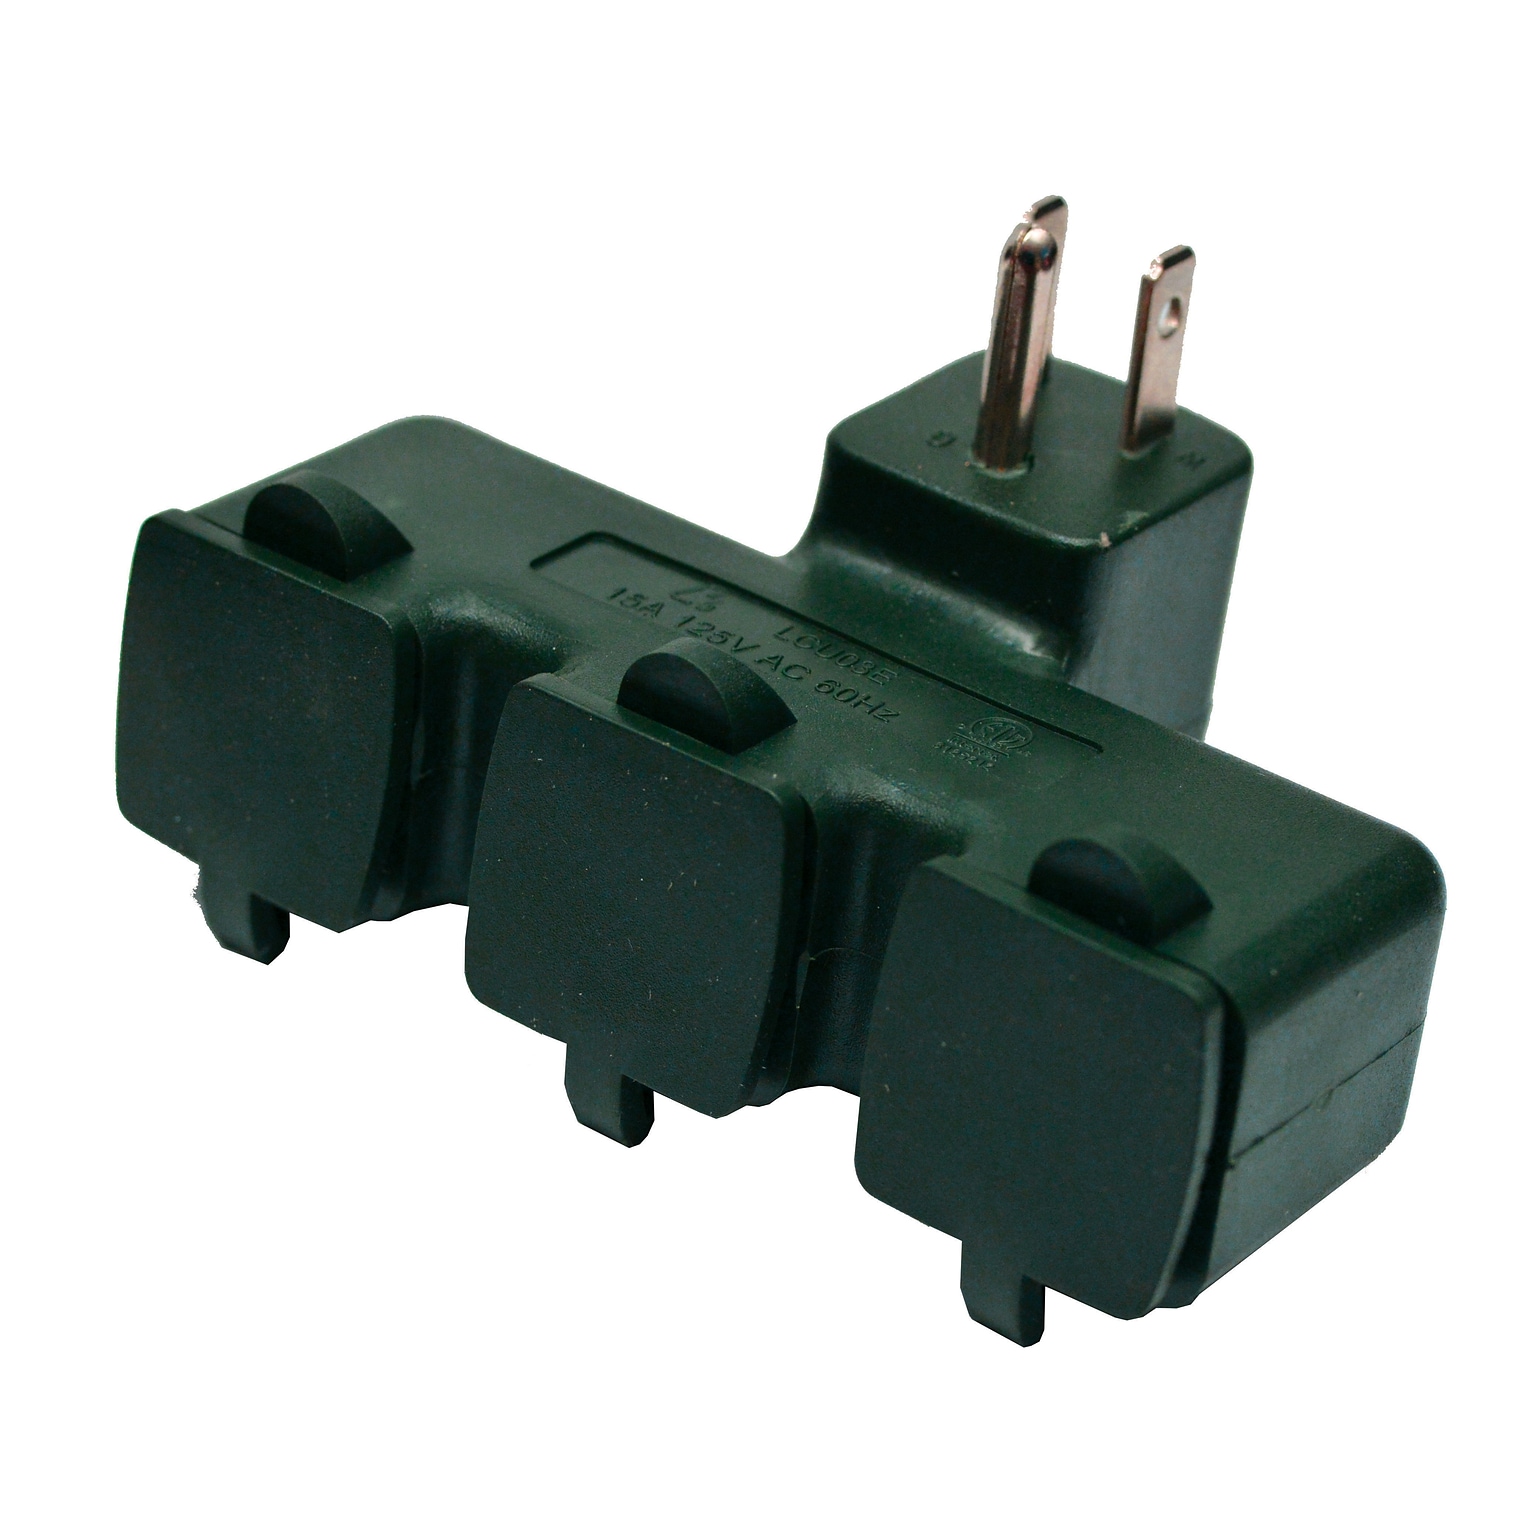 GoGreen Power 3 Outlet Tri Tap Adapter with Covers, Green (GG-03431GN)